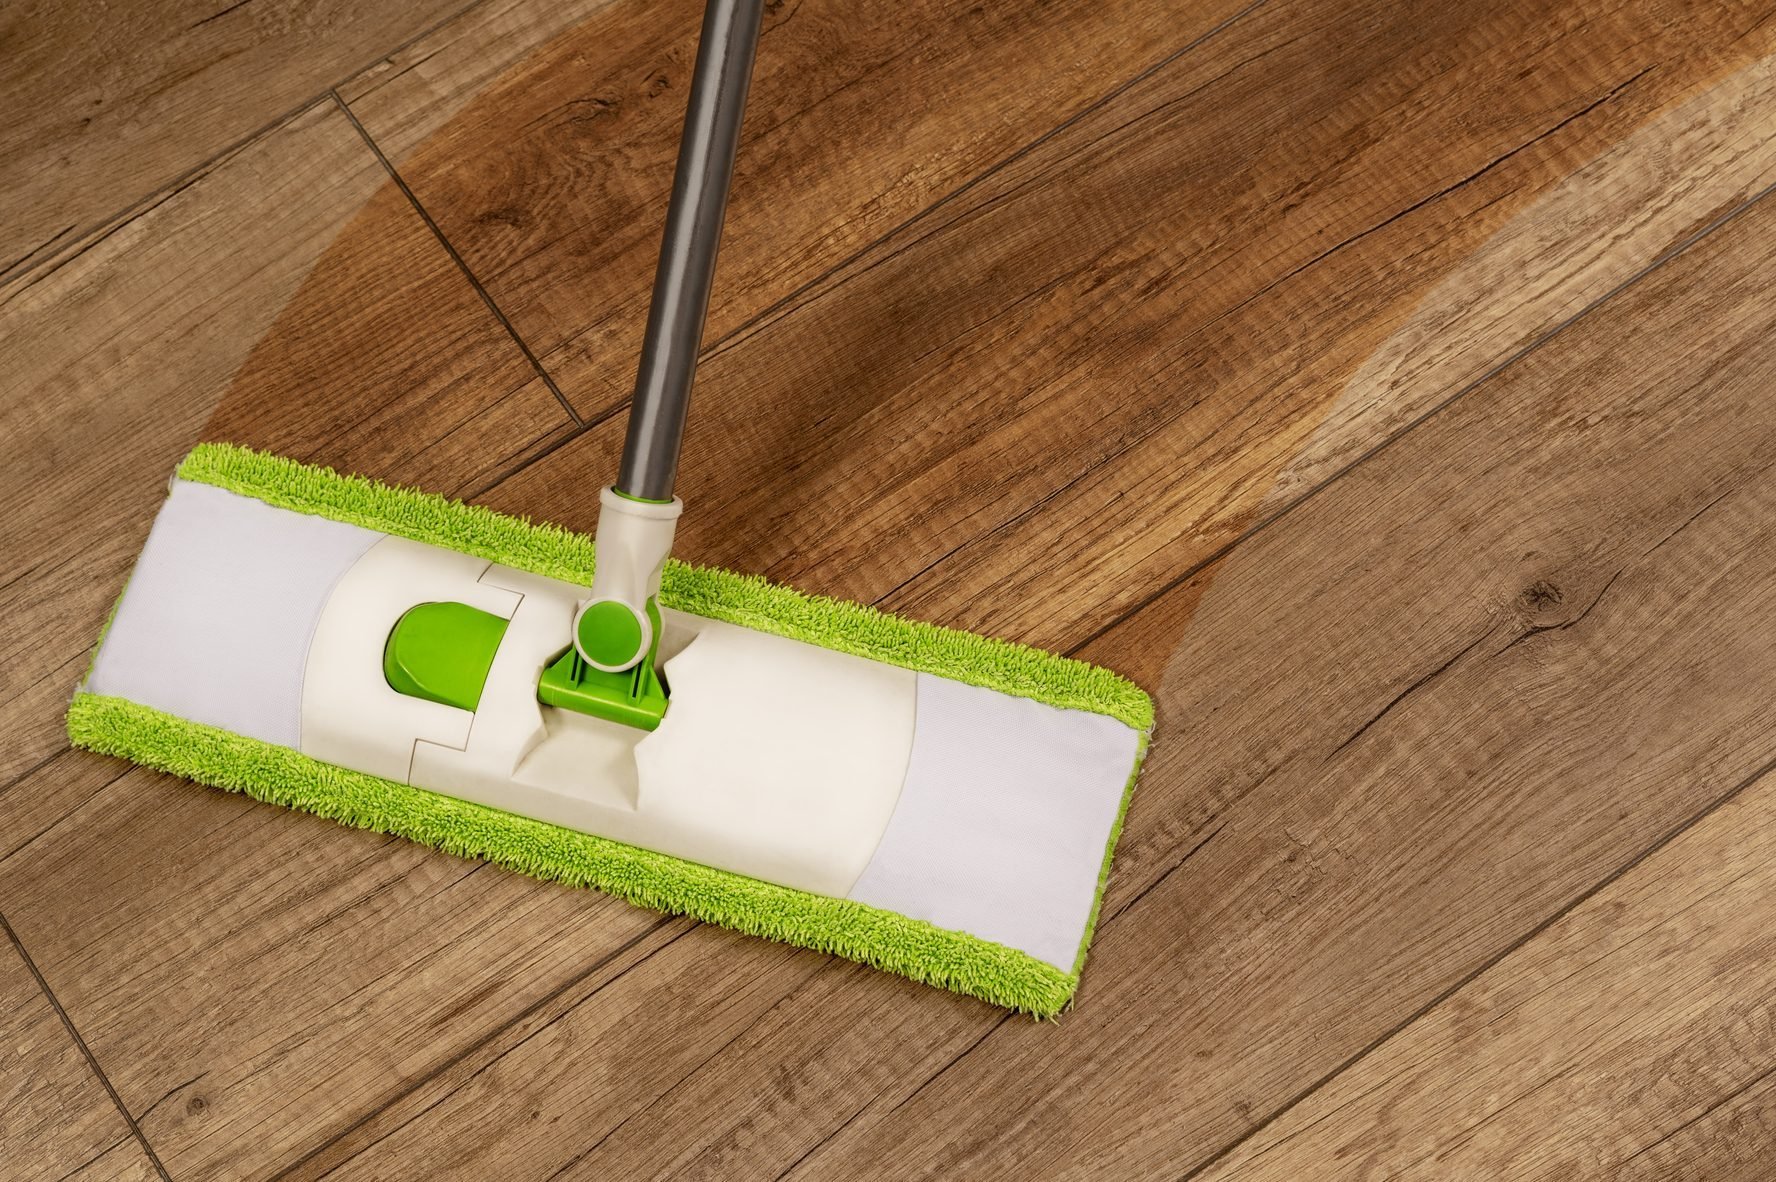 How To Use Wood Floor Cleaner